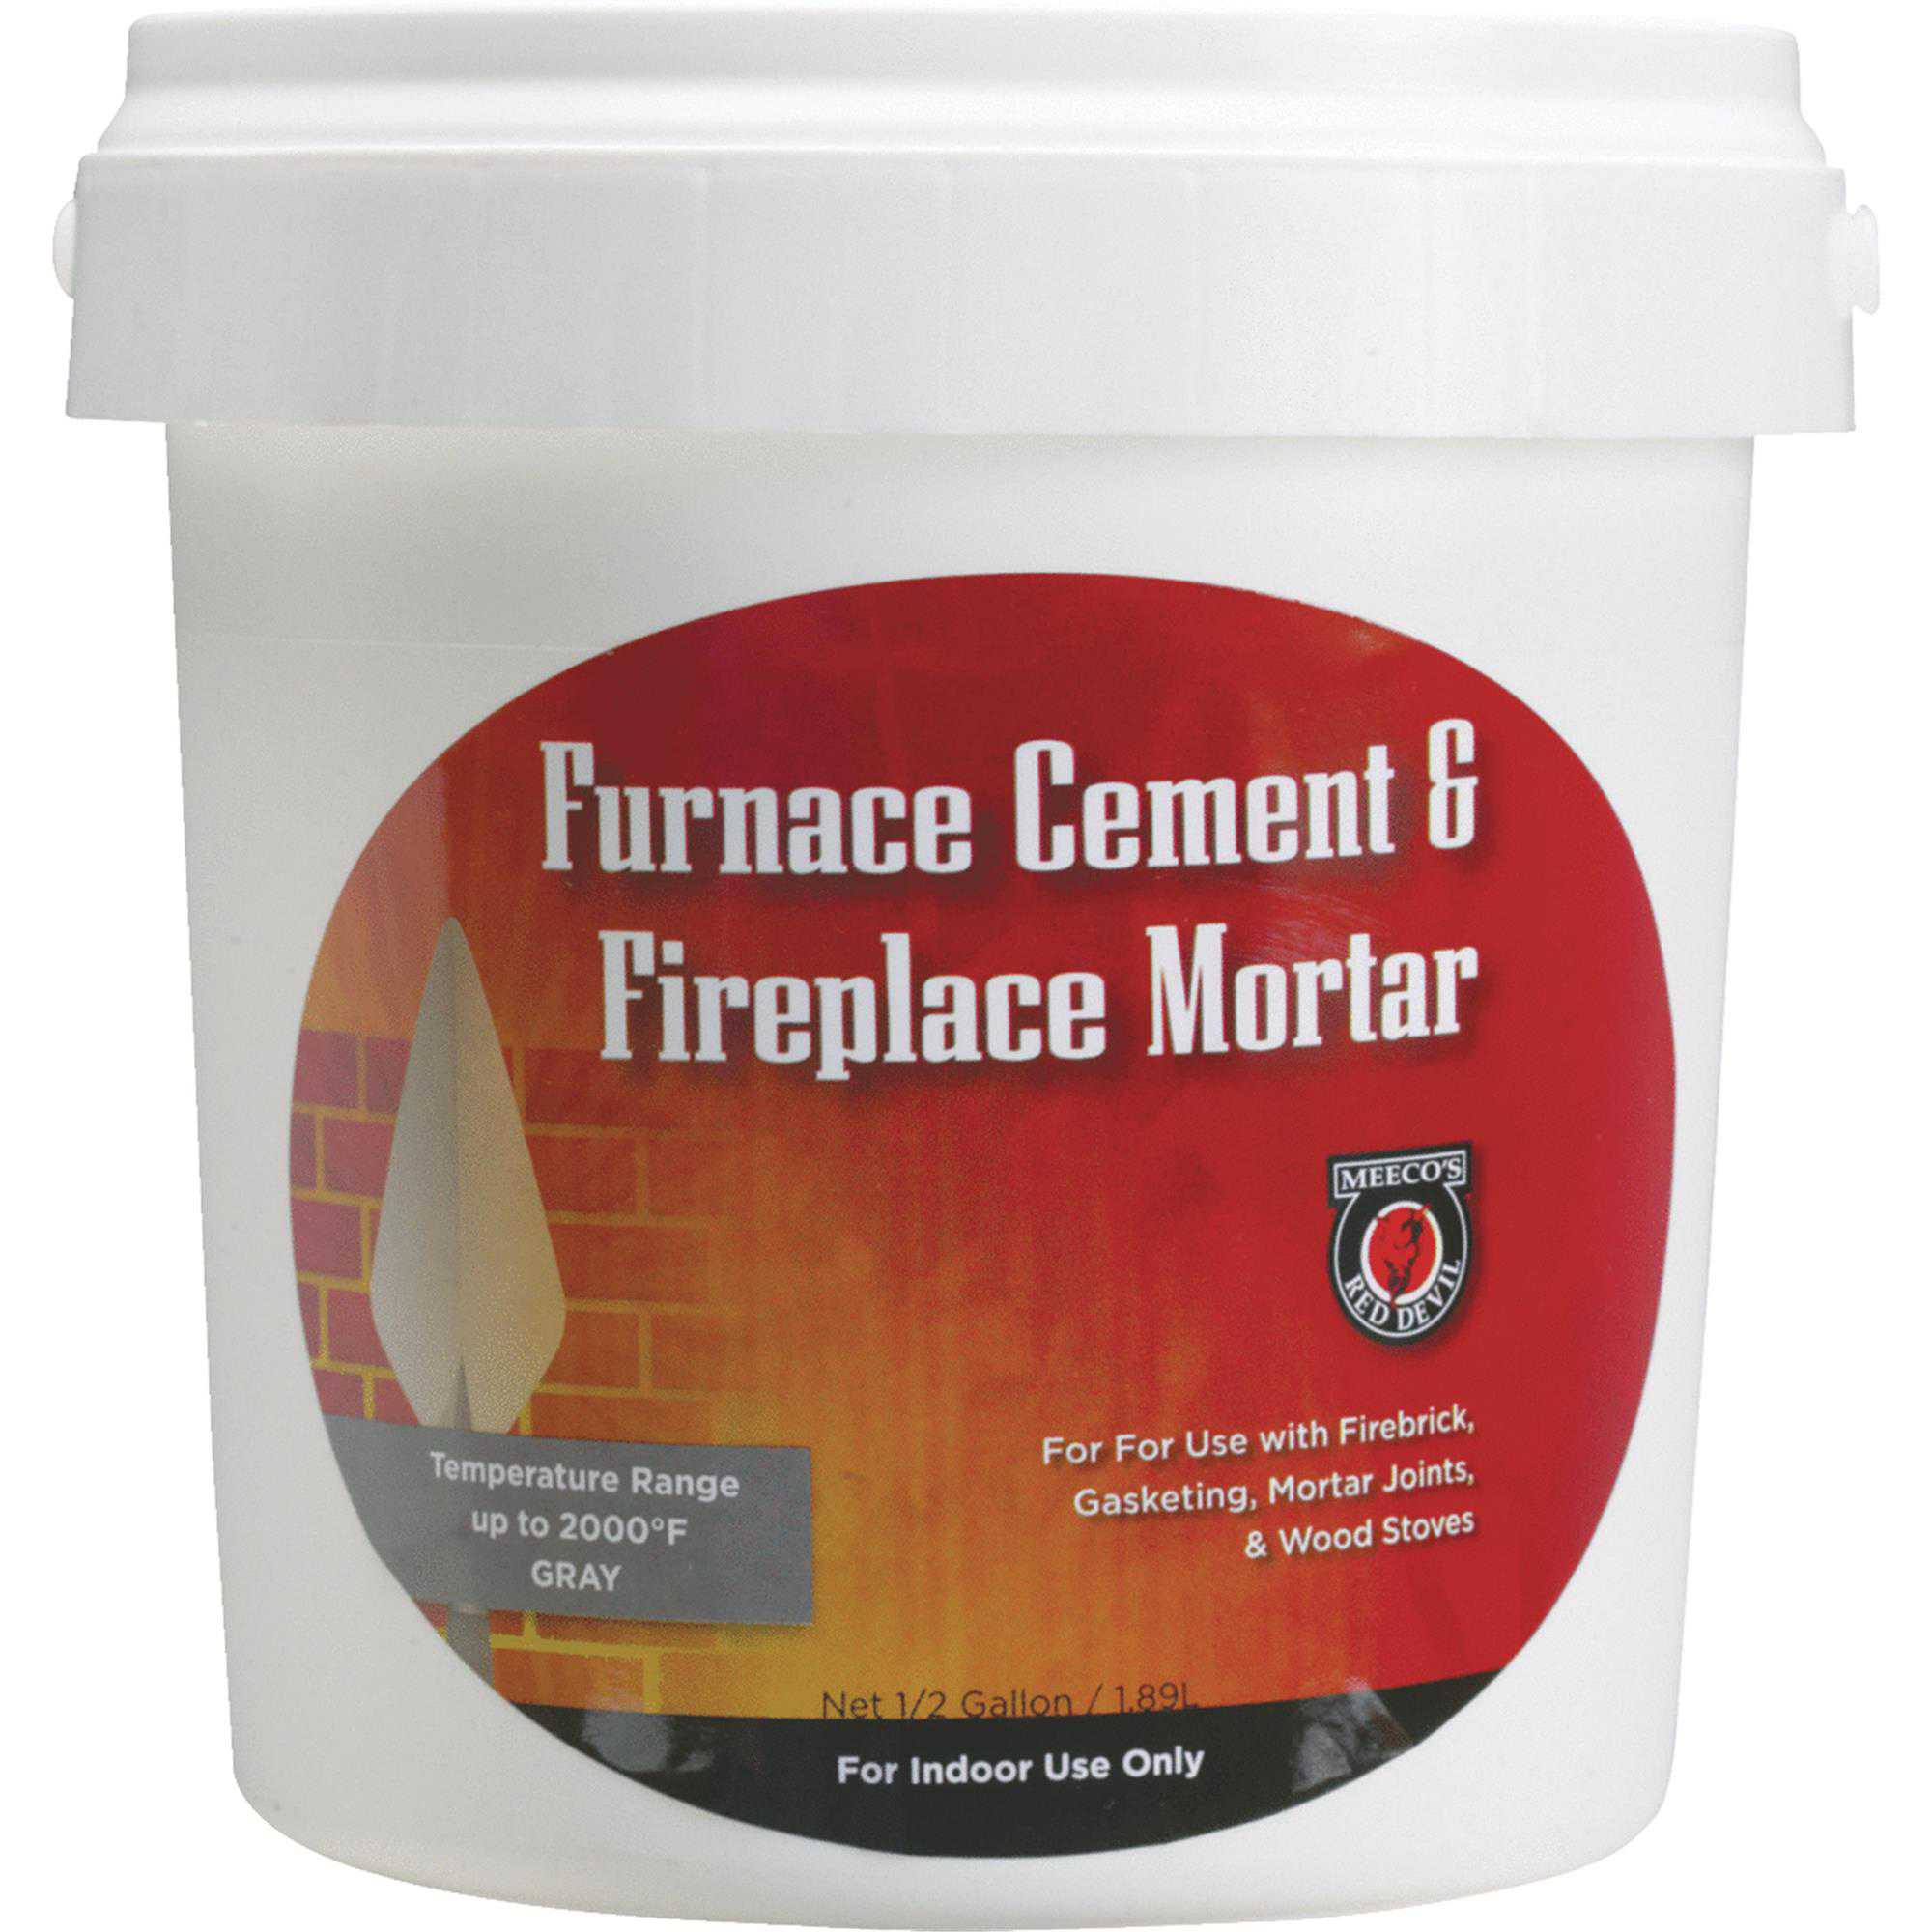 Meeco's Red Devil Furnace Cement & Fireplace Mortar